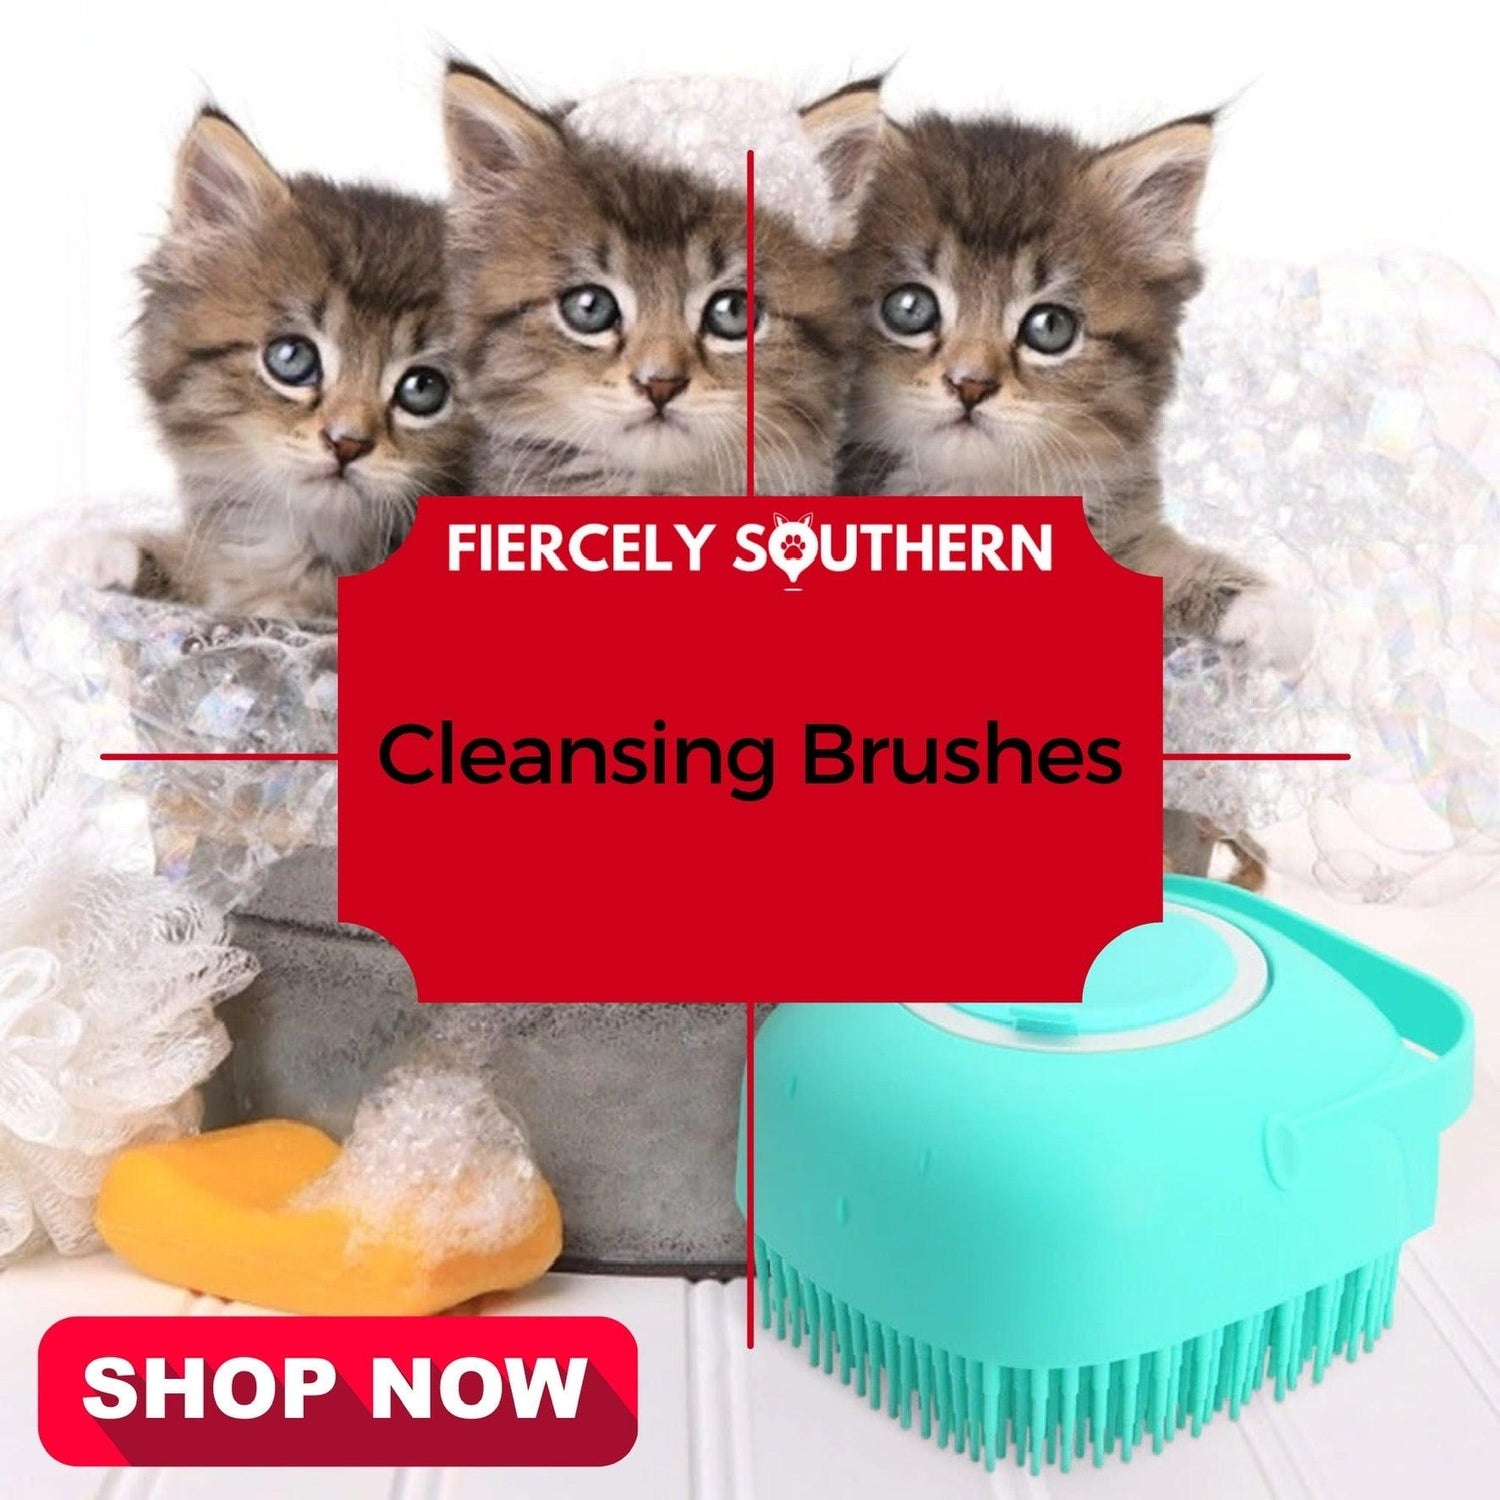 Cleansing Brushes - Fiercely Southern